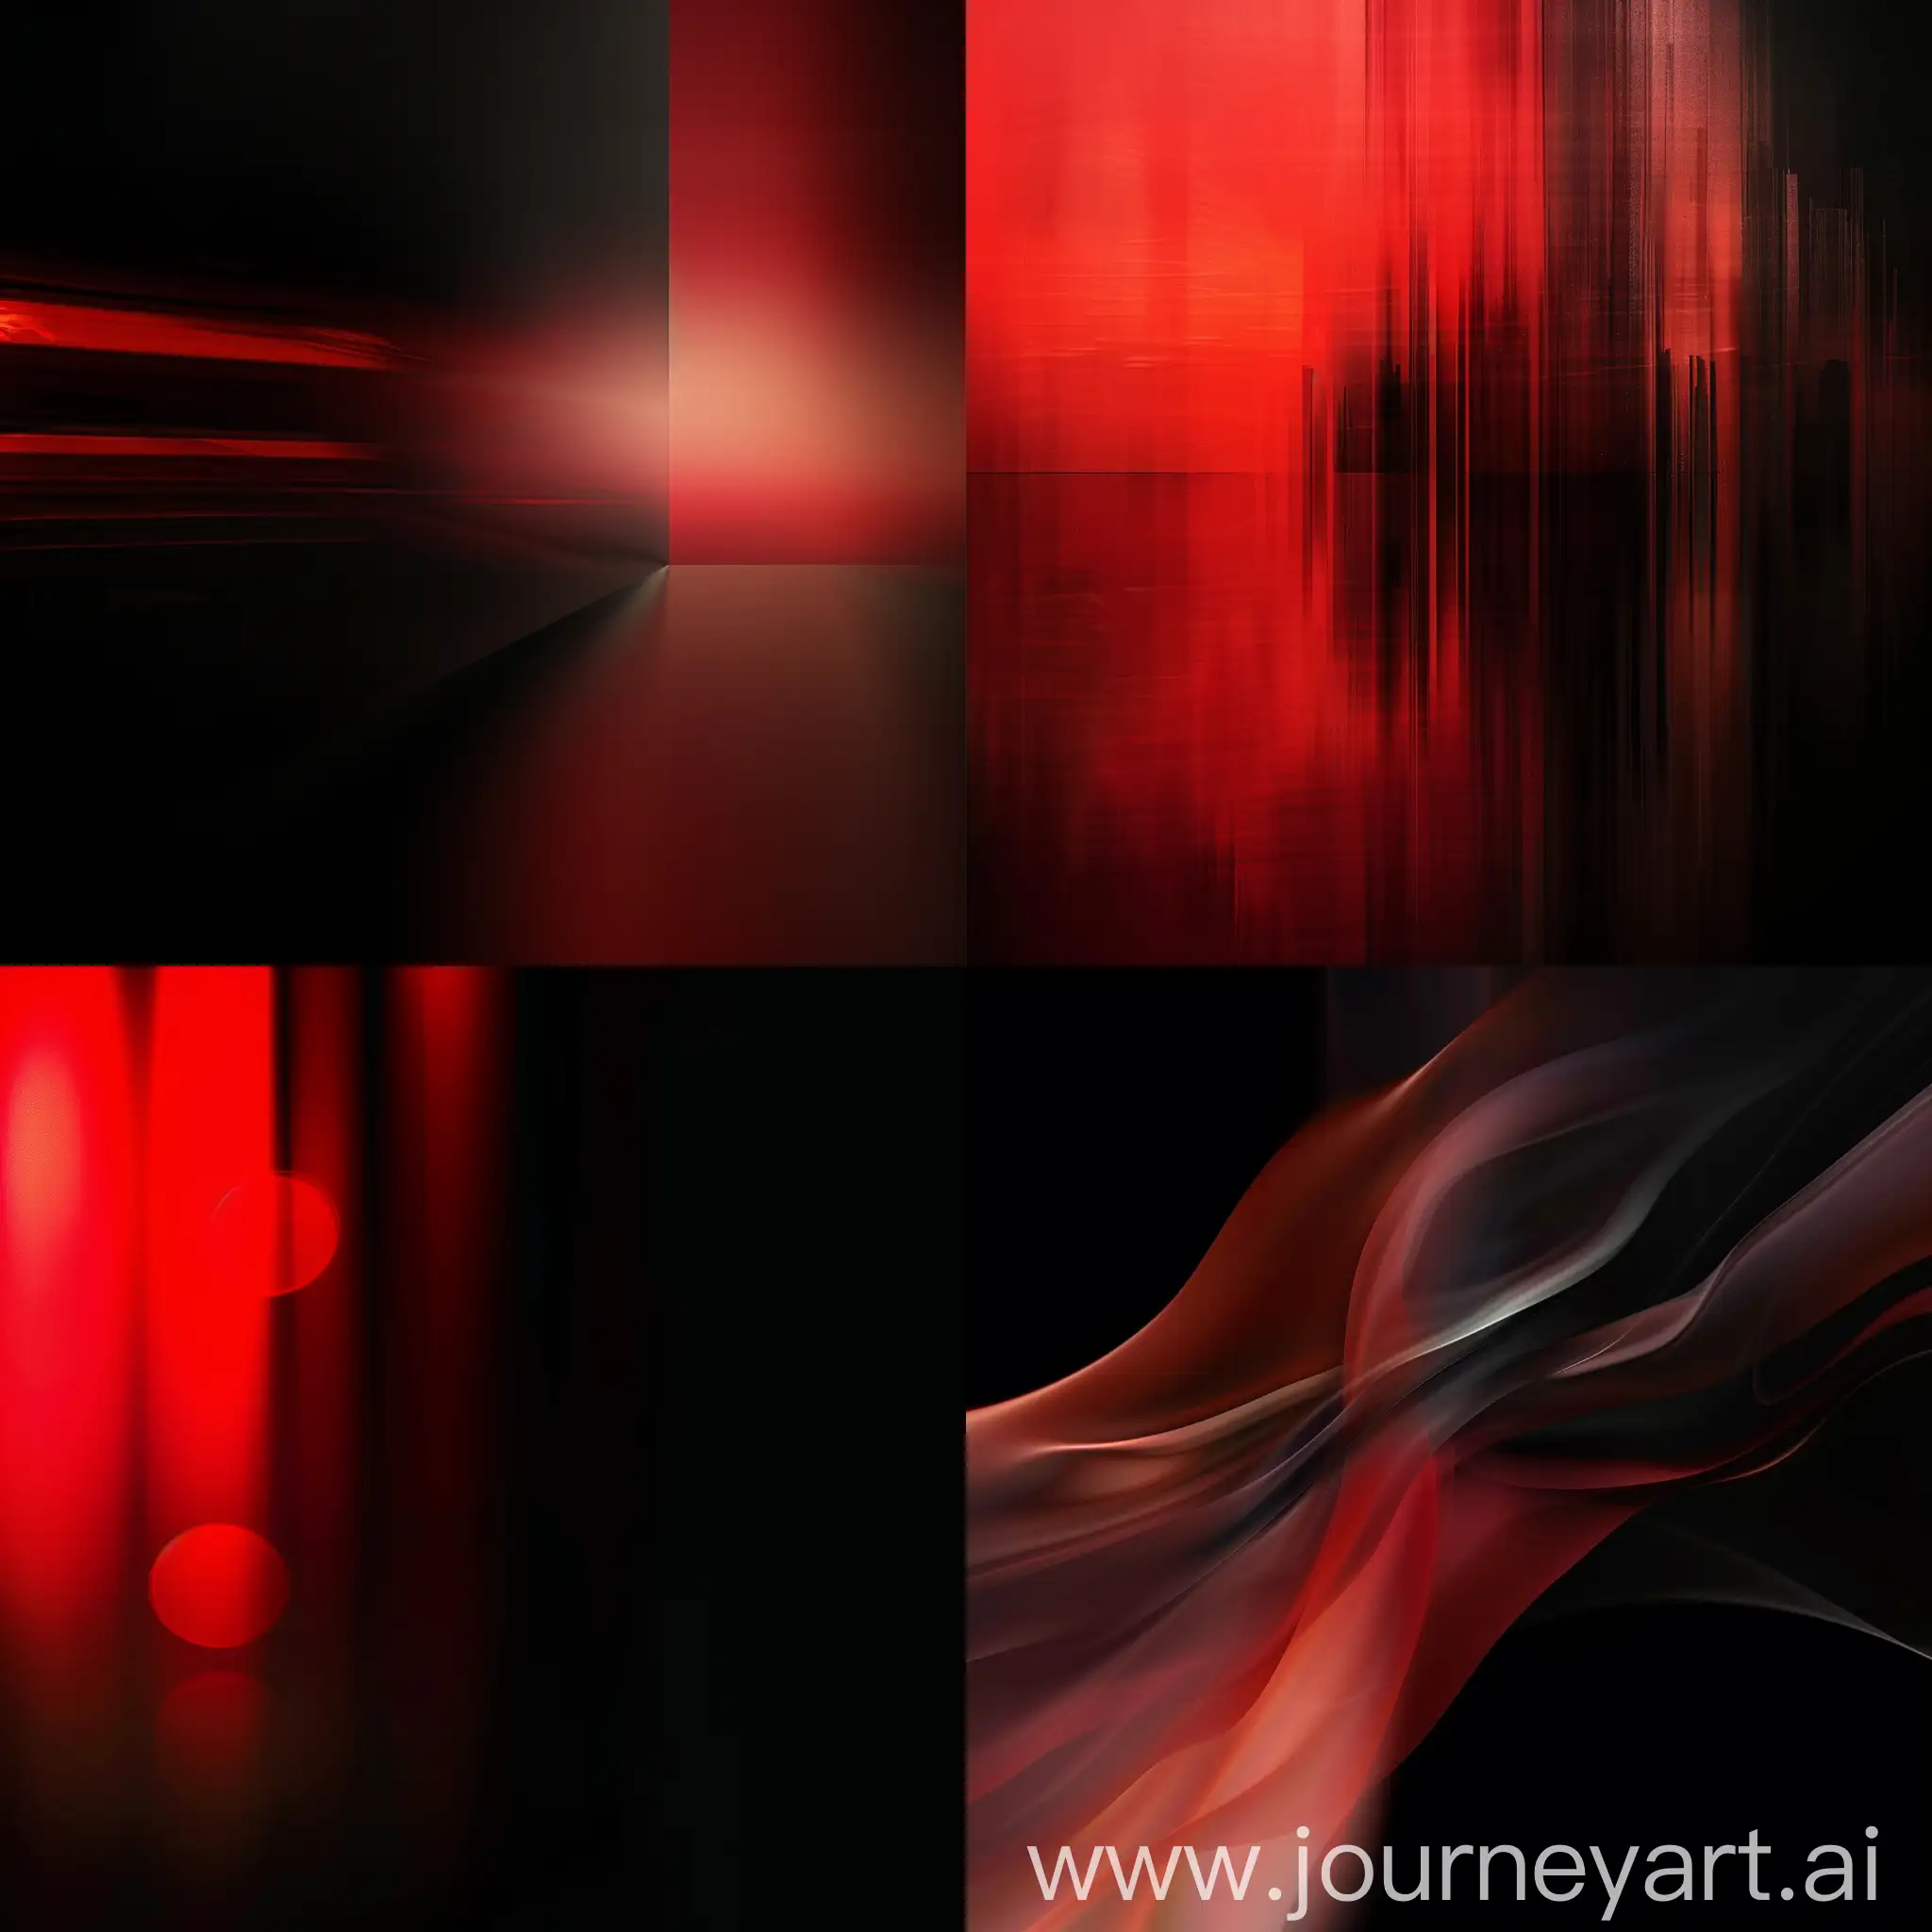 Minimalist-Red-and-Black-Abstract-Art-on-Blurred-Background